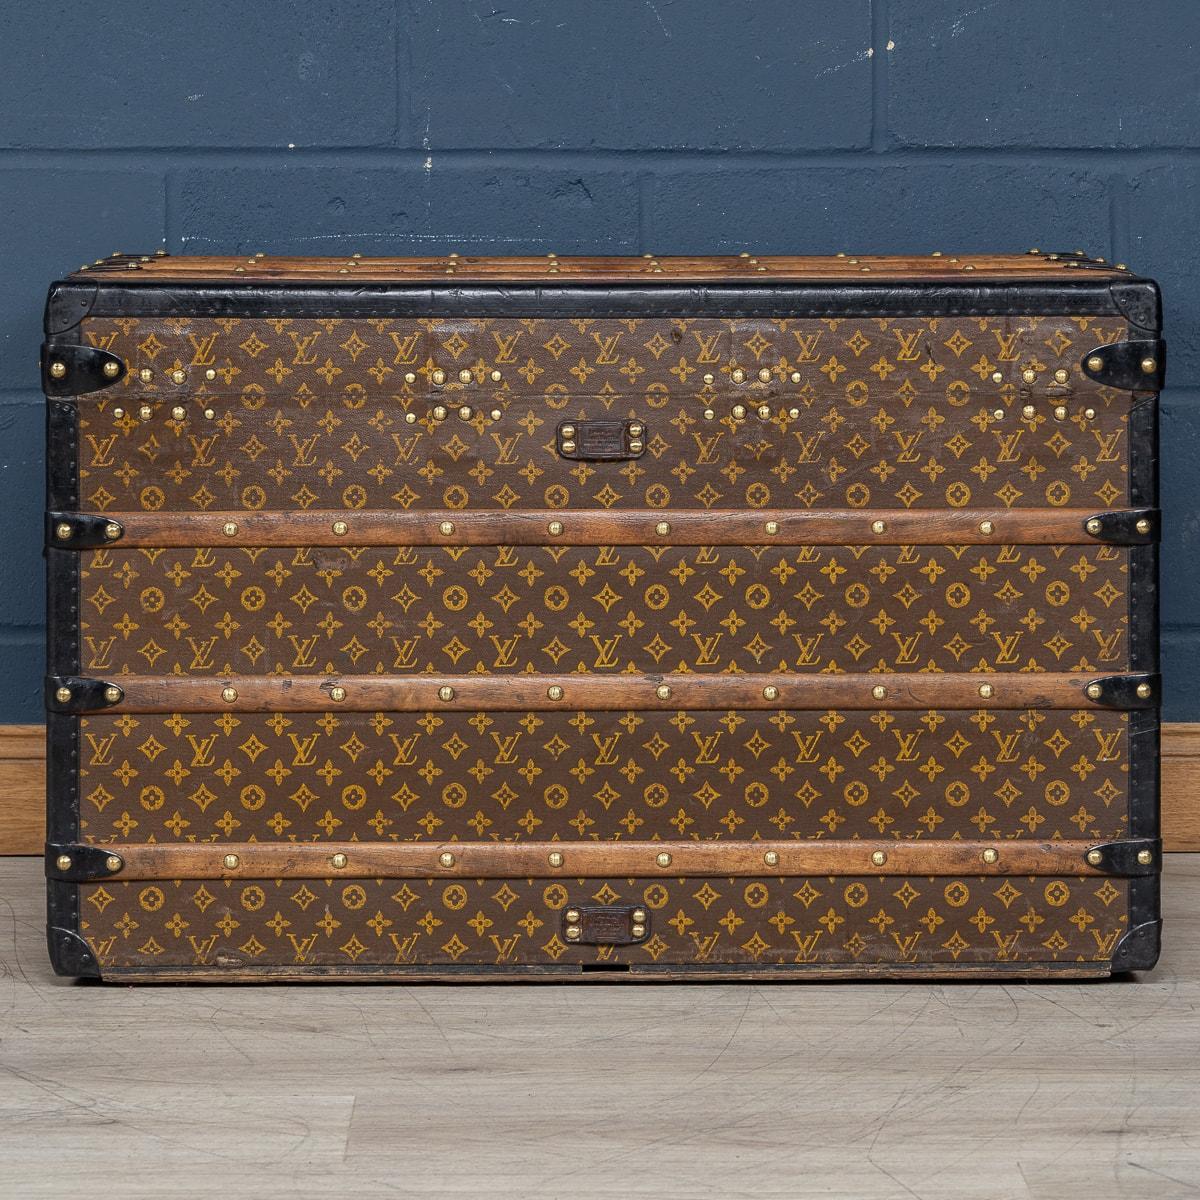 French 20th Century Louis Vuitton Courier Trunk In Monogram Canvas, France c.1910 For Sale